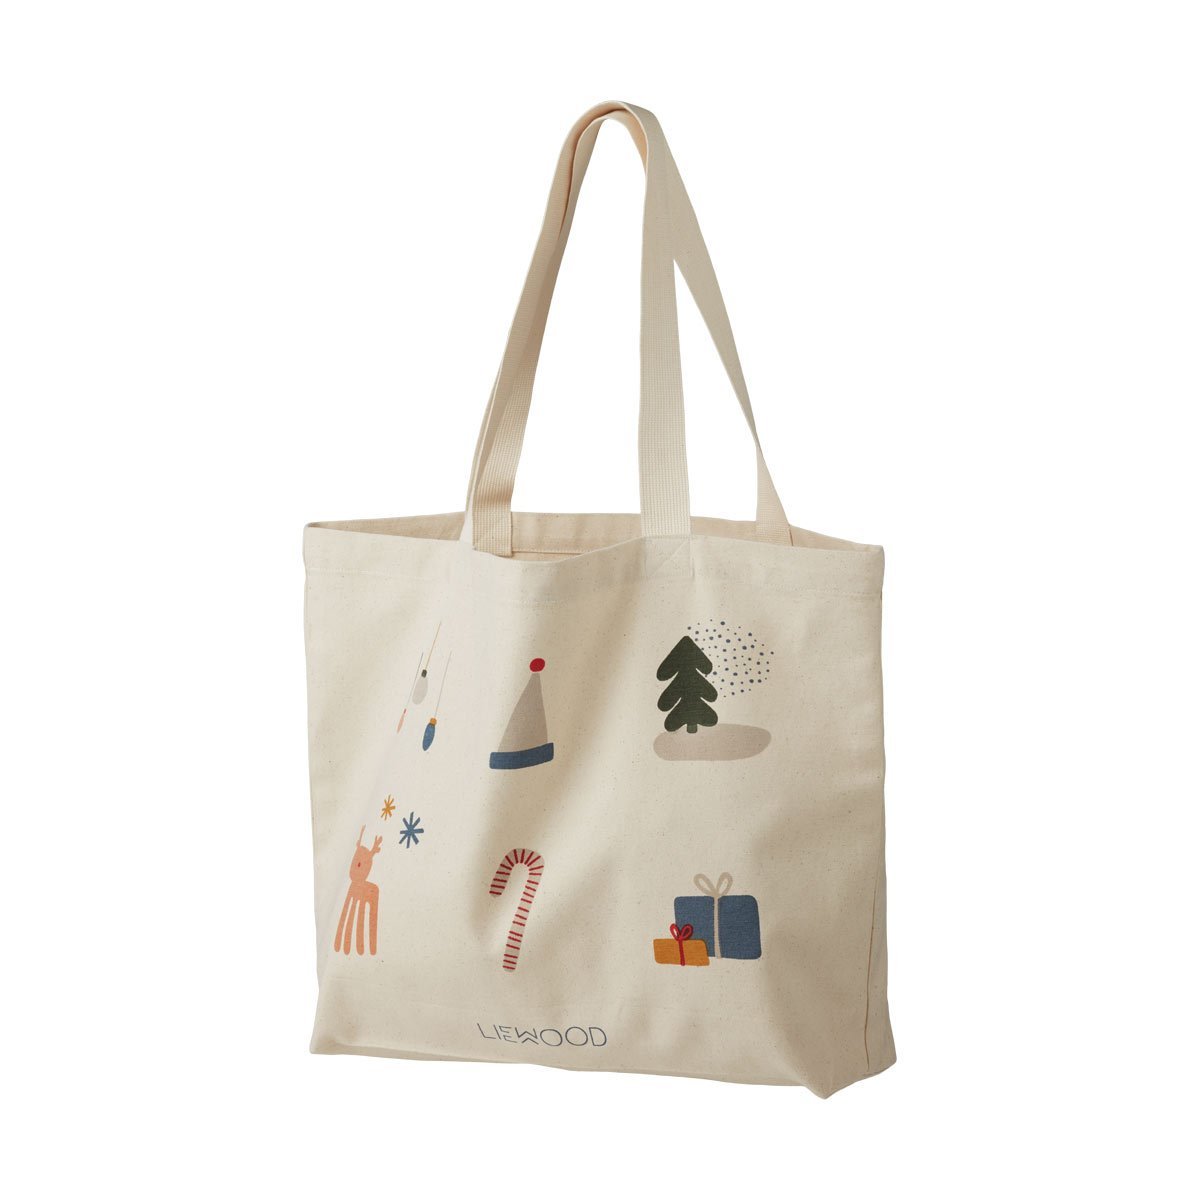 Liewood Tote Bag in Holiday Mix - Big - Scandibørn